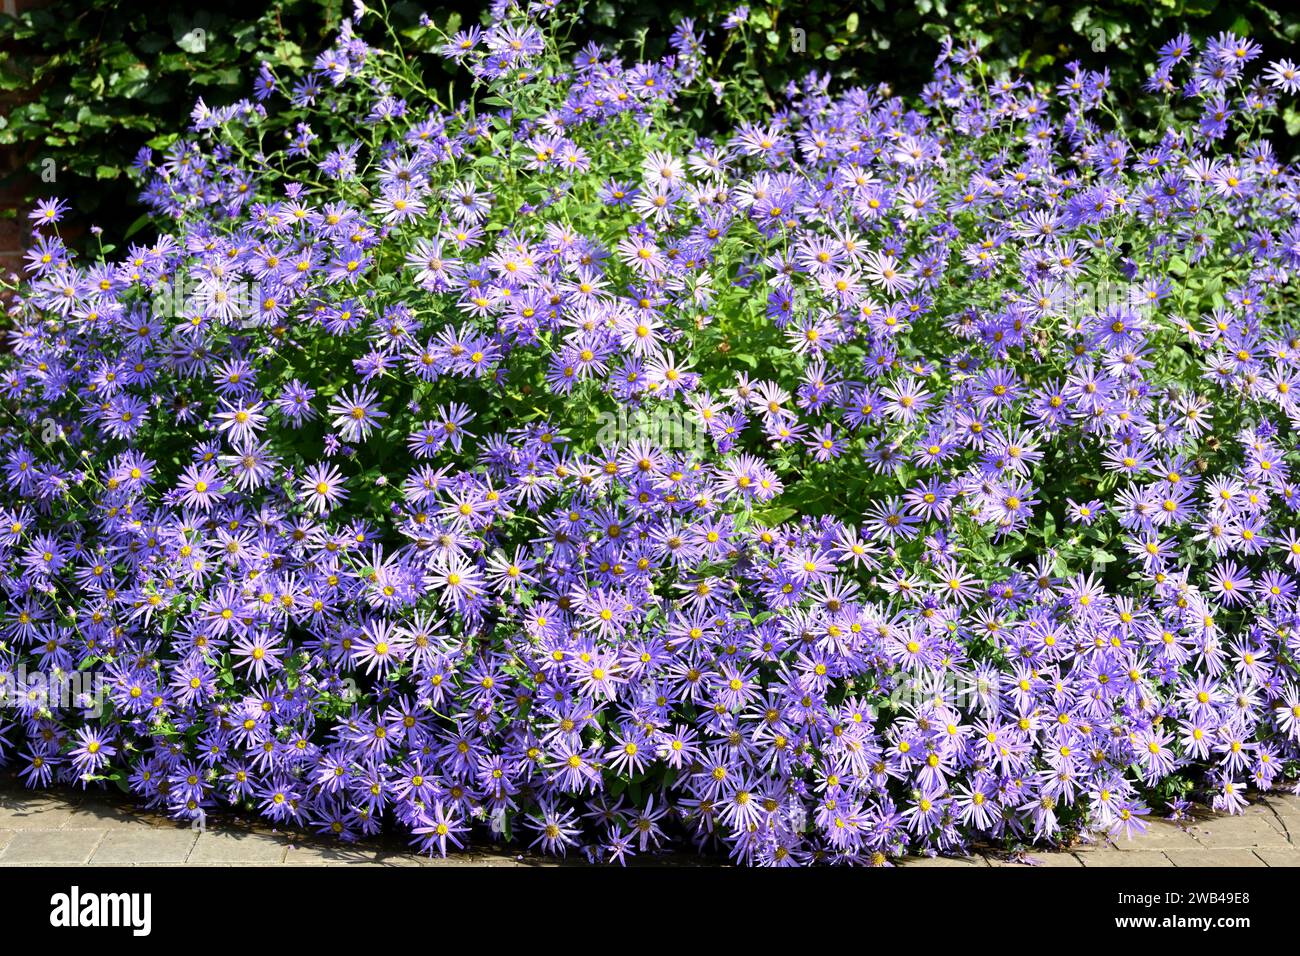 Starry purple late summer flowers of michaelmas daisies or Aster x frikartii 'Mönch' Stock Photo